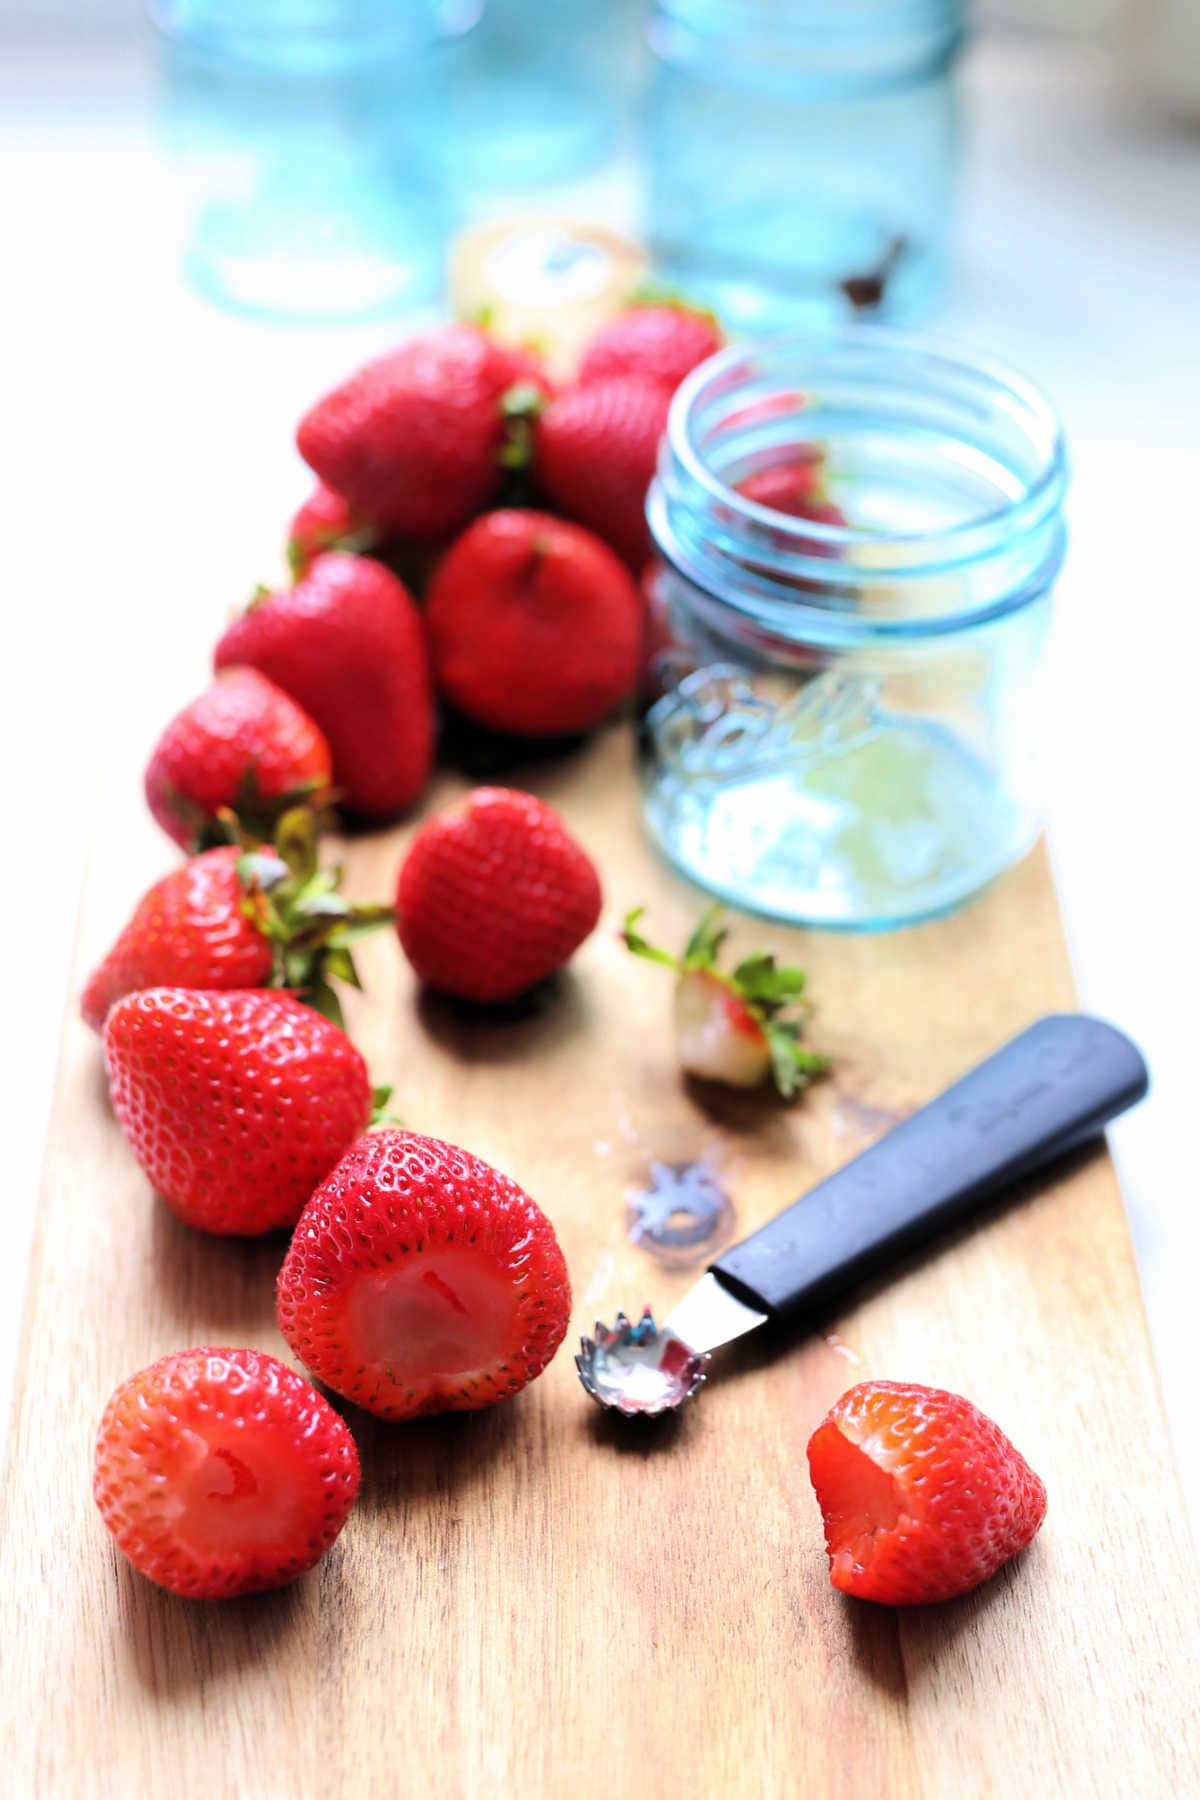 learn how to make strawberry jam